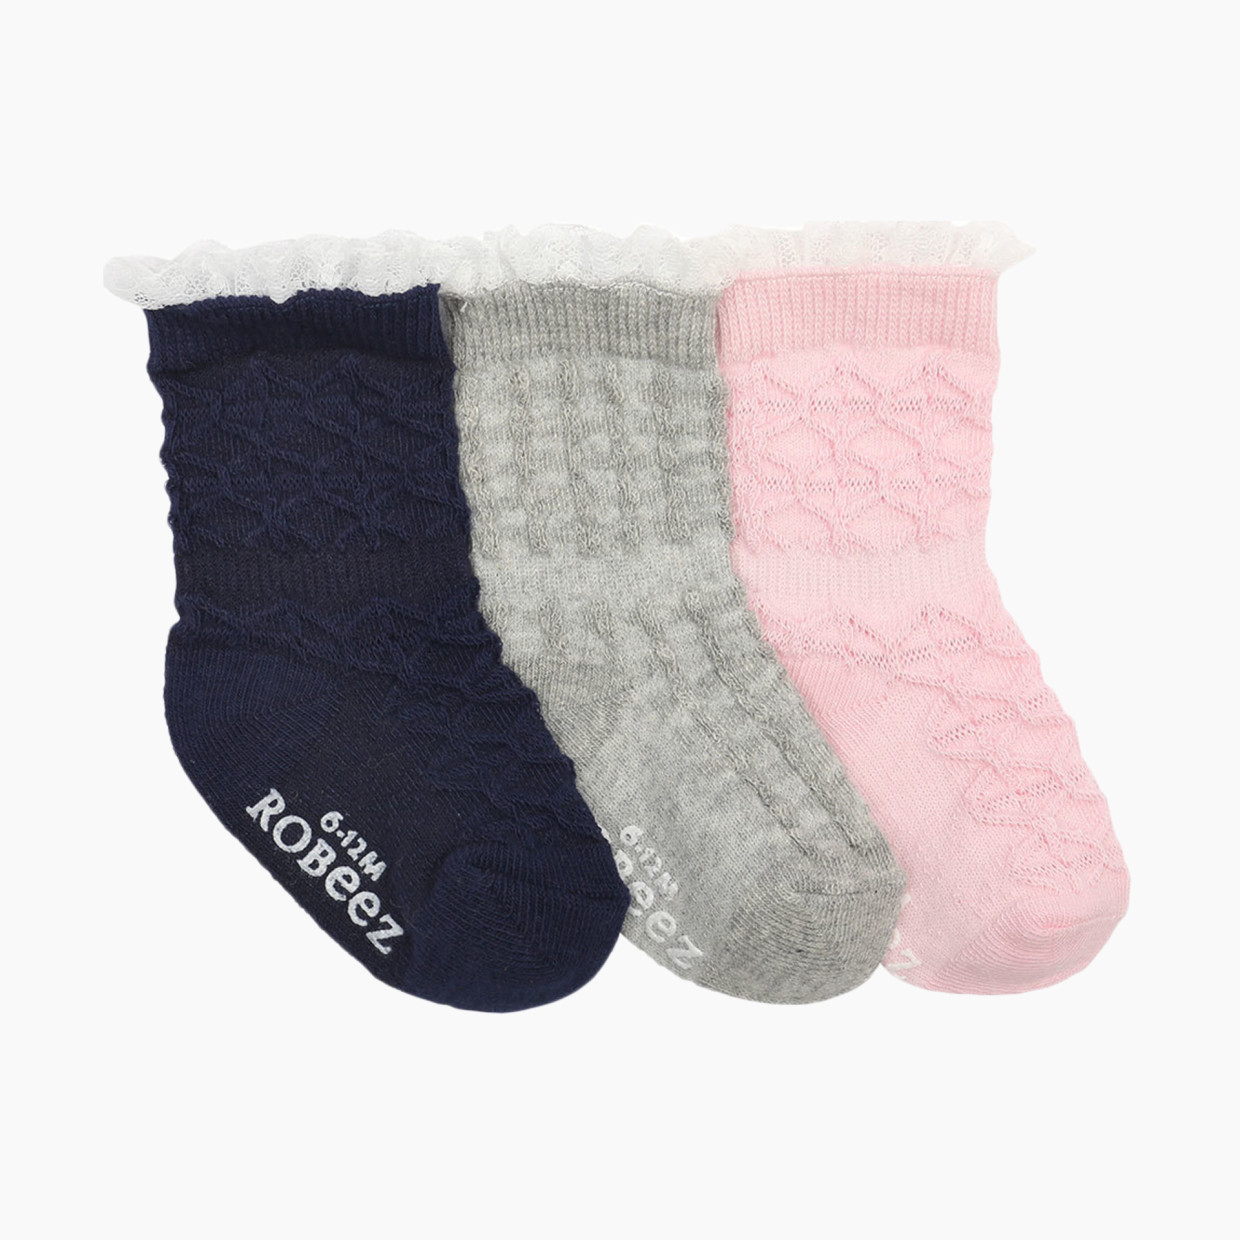 Robeez Socks (3 Pack) - Pretty Cables, 0-6 Months.